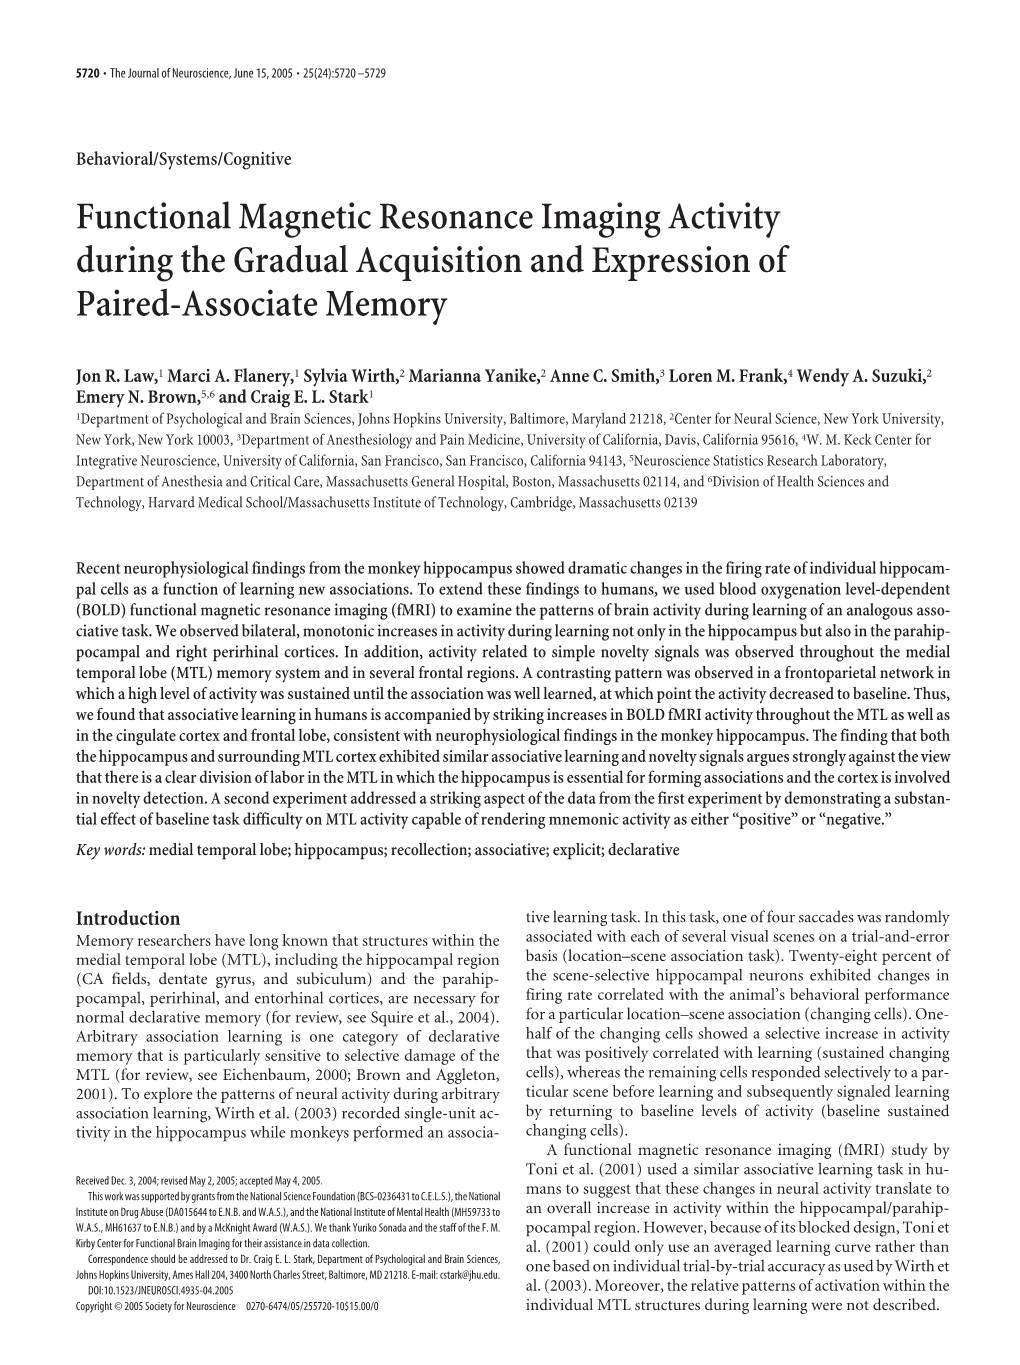 Functional Magnetic Resonance Imaging Activity During the Gradual Acquisition and Expression of Paired-Associate Memory